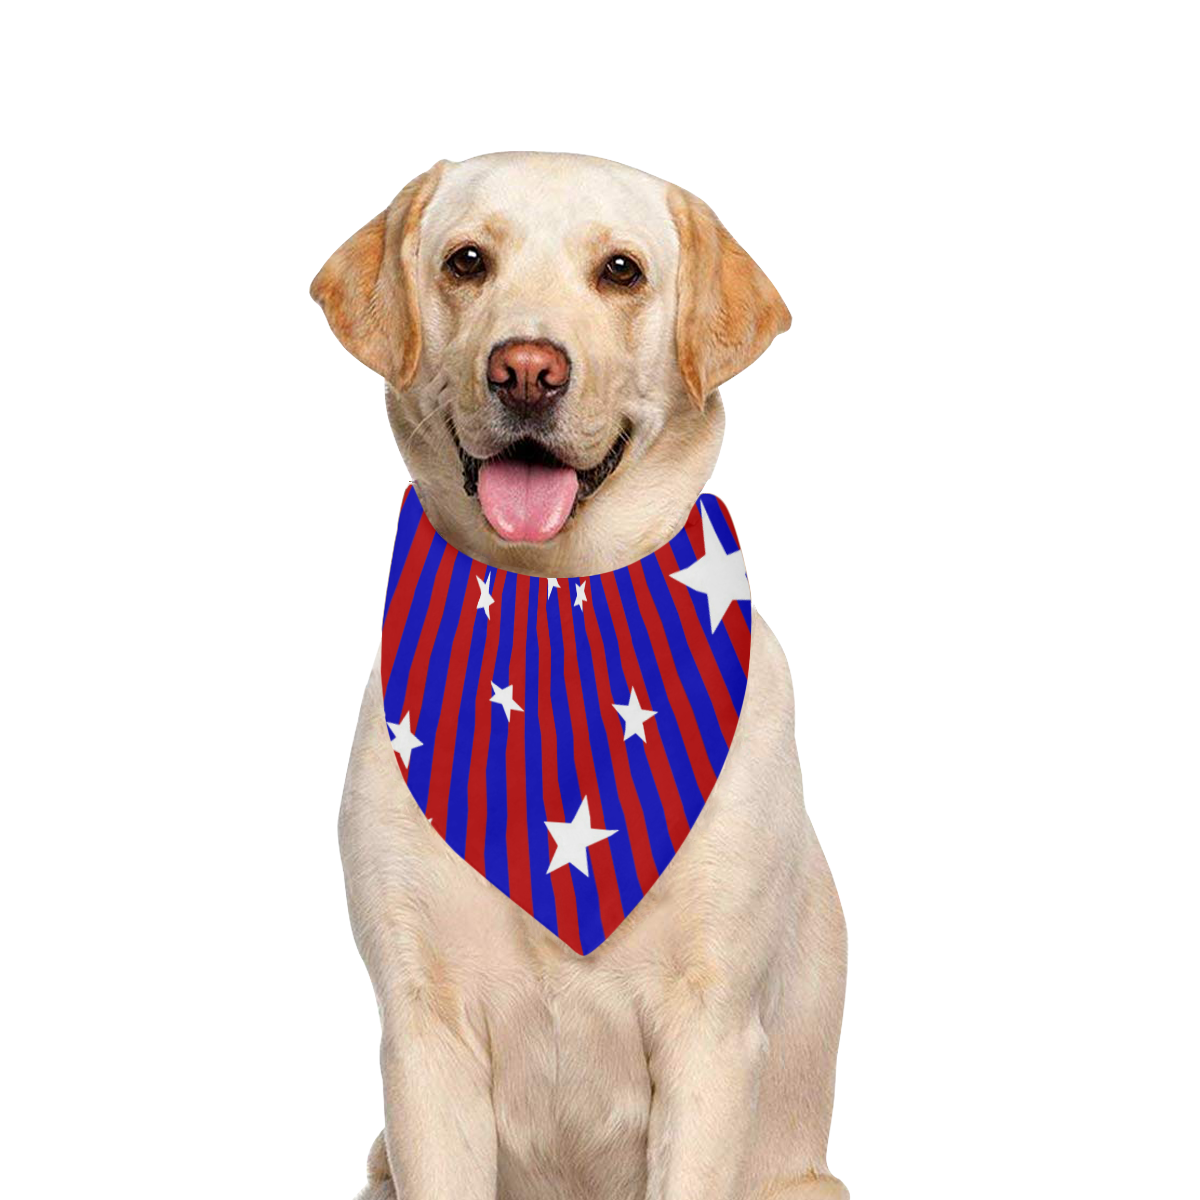 Stars with Blue and Red Stripes Pet Dog Bandana/Large Size